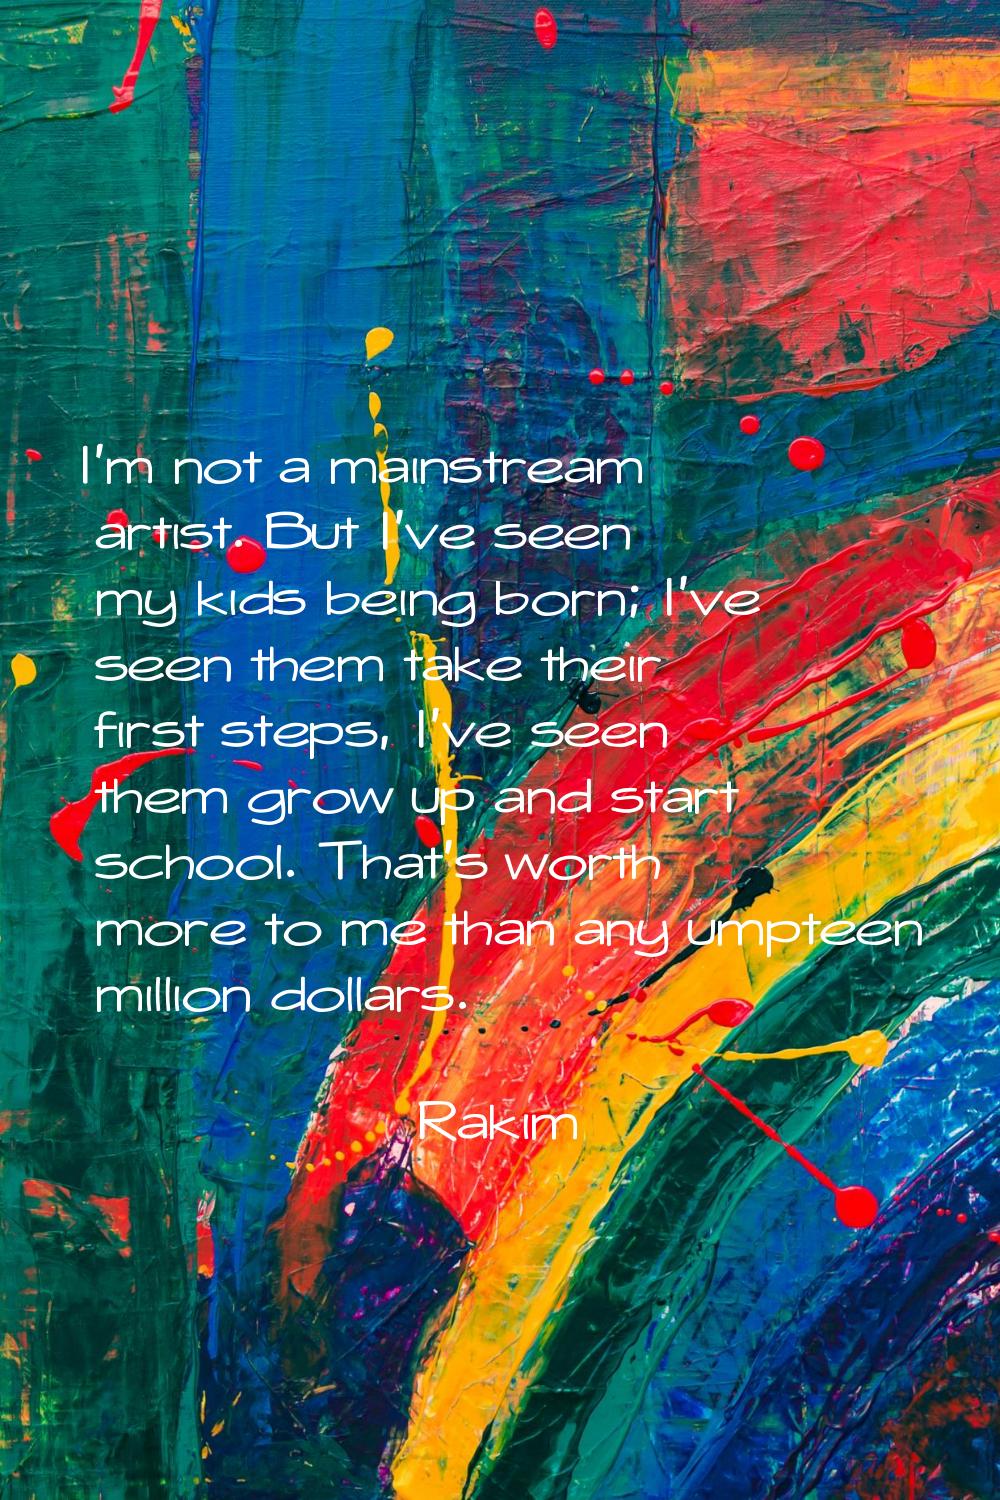 I'm not a mainstream artist. But I've seen my kids being born; I've seen them take their first step